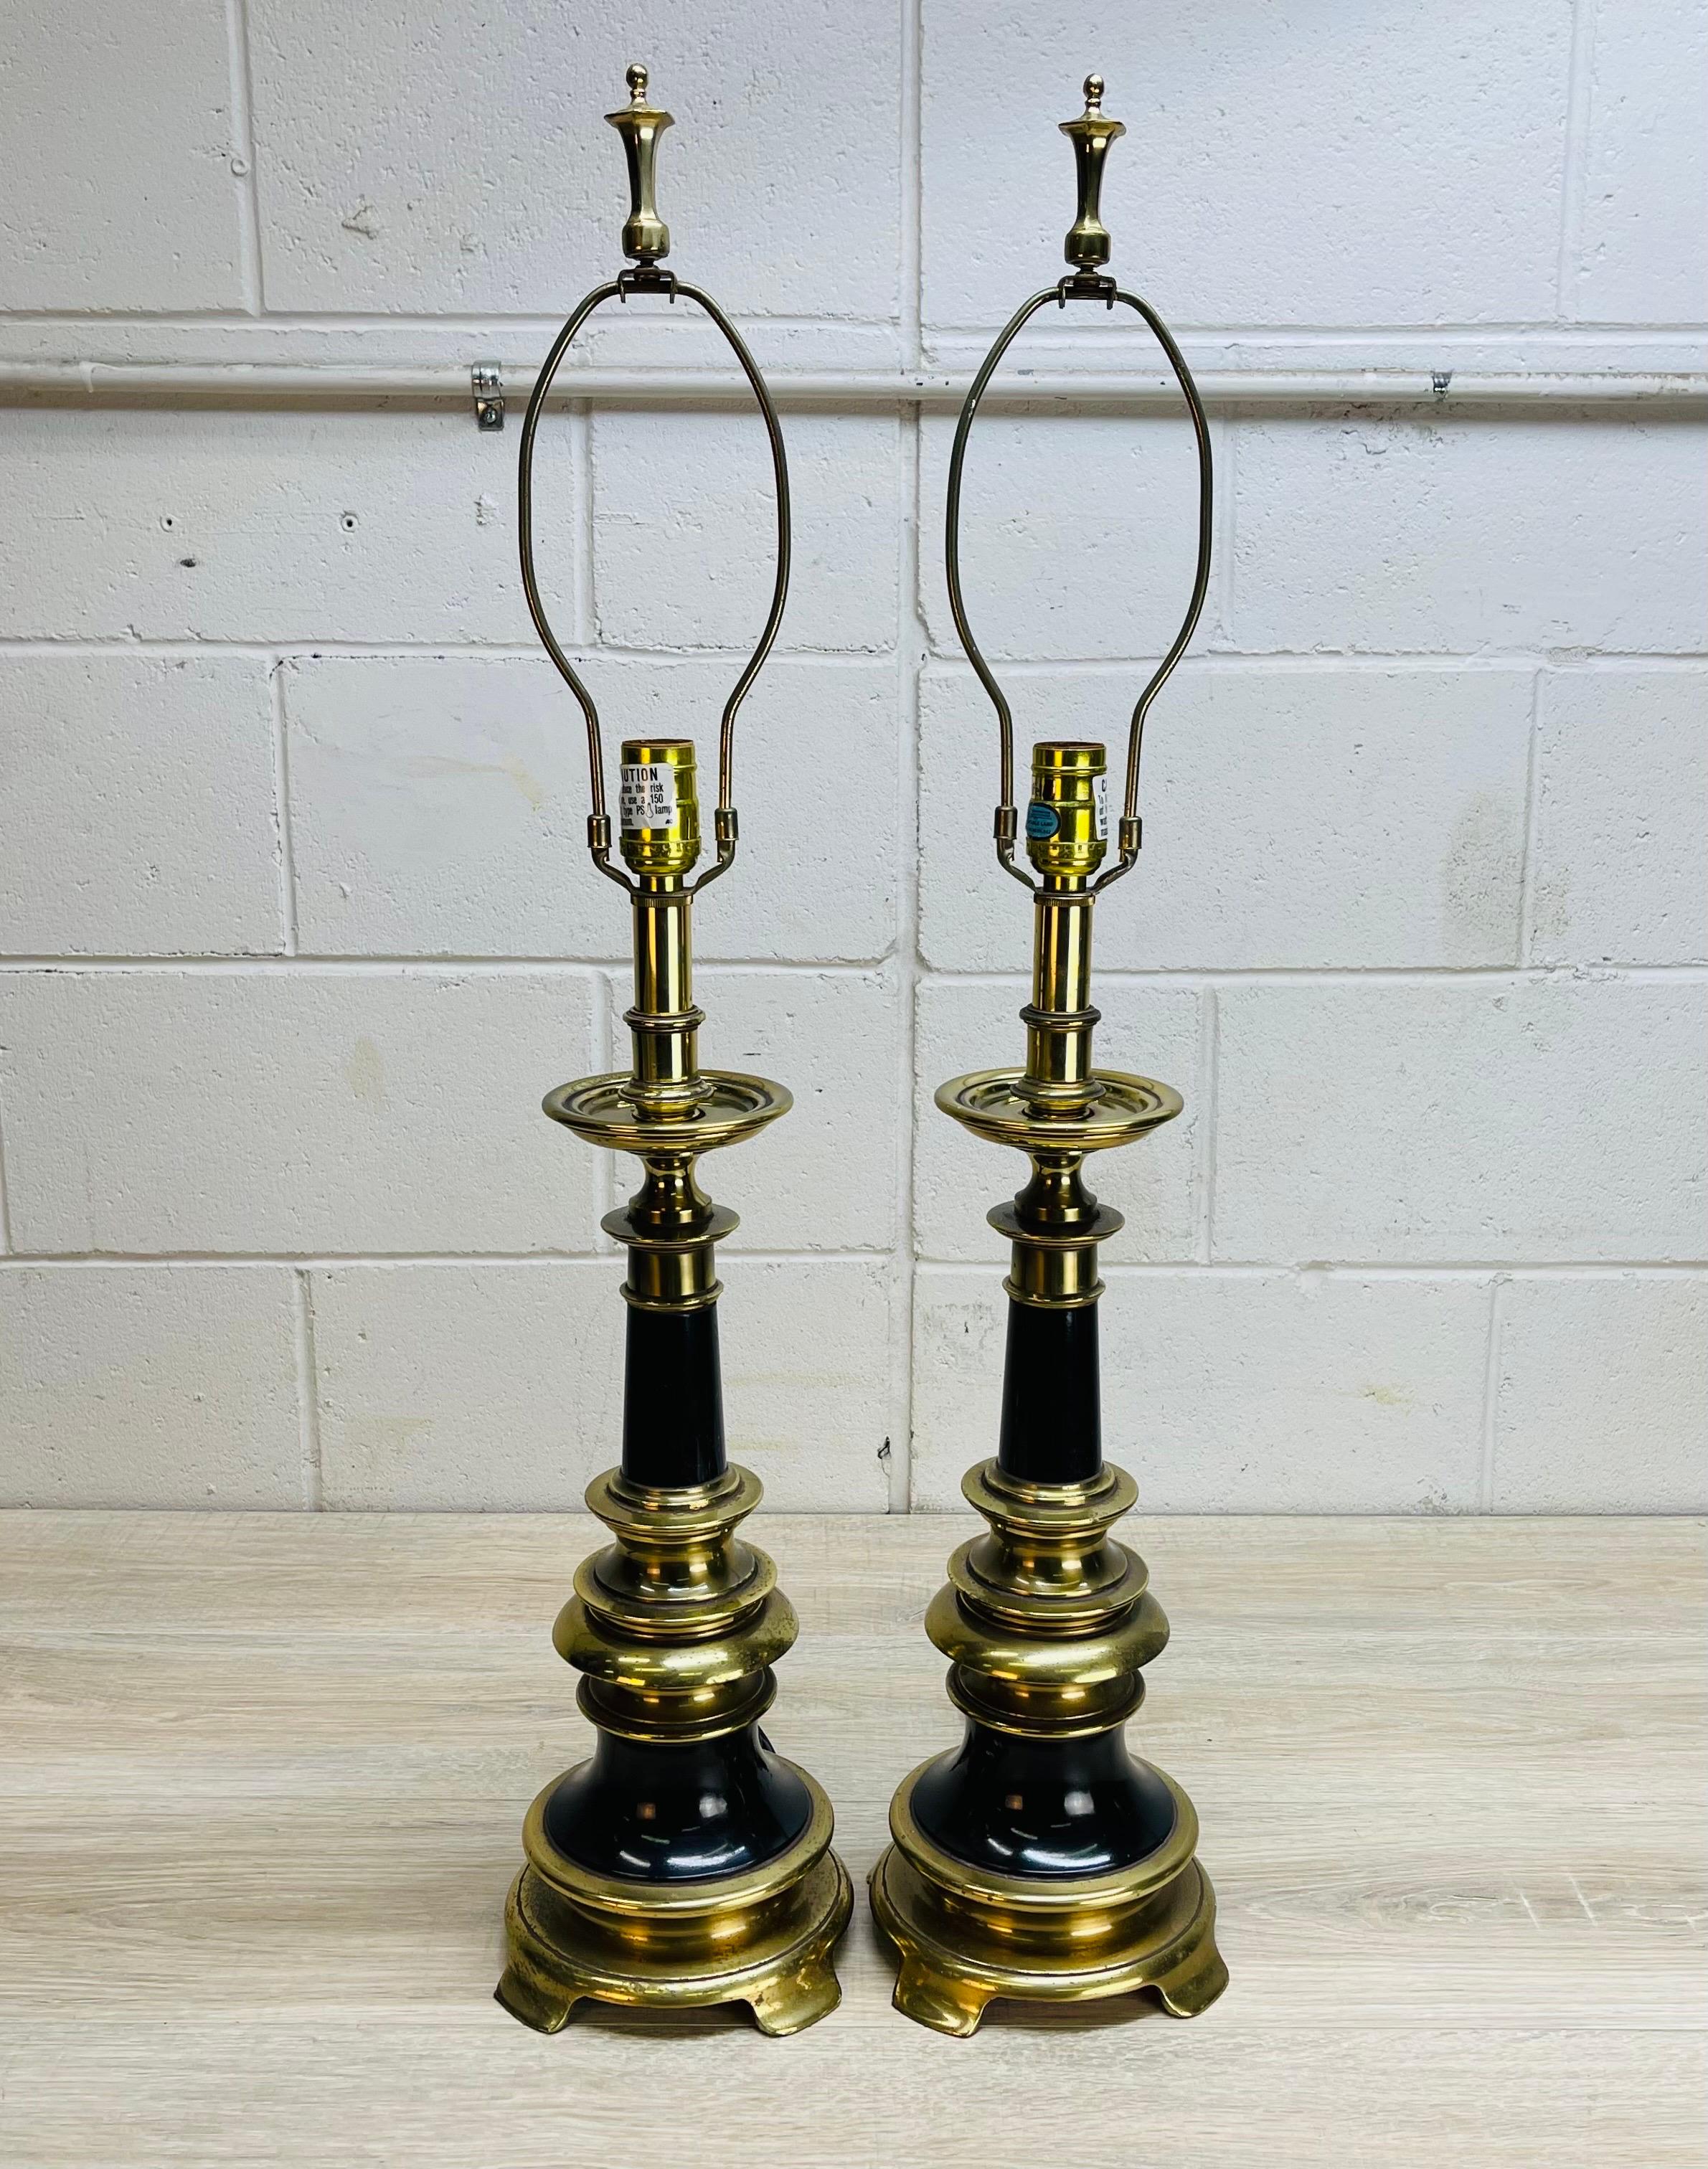 Vintage 1960s pair of Stiffel brass and black metal table lamps. The lamps have the original finials and can use a 3-way 150W bulb. Wired for the US and in working condition. Measures: Socket, 23” H. Harp, 4.5” diameter x 9” height. Marked.